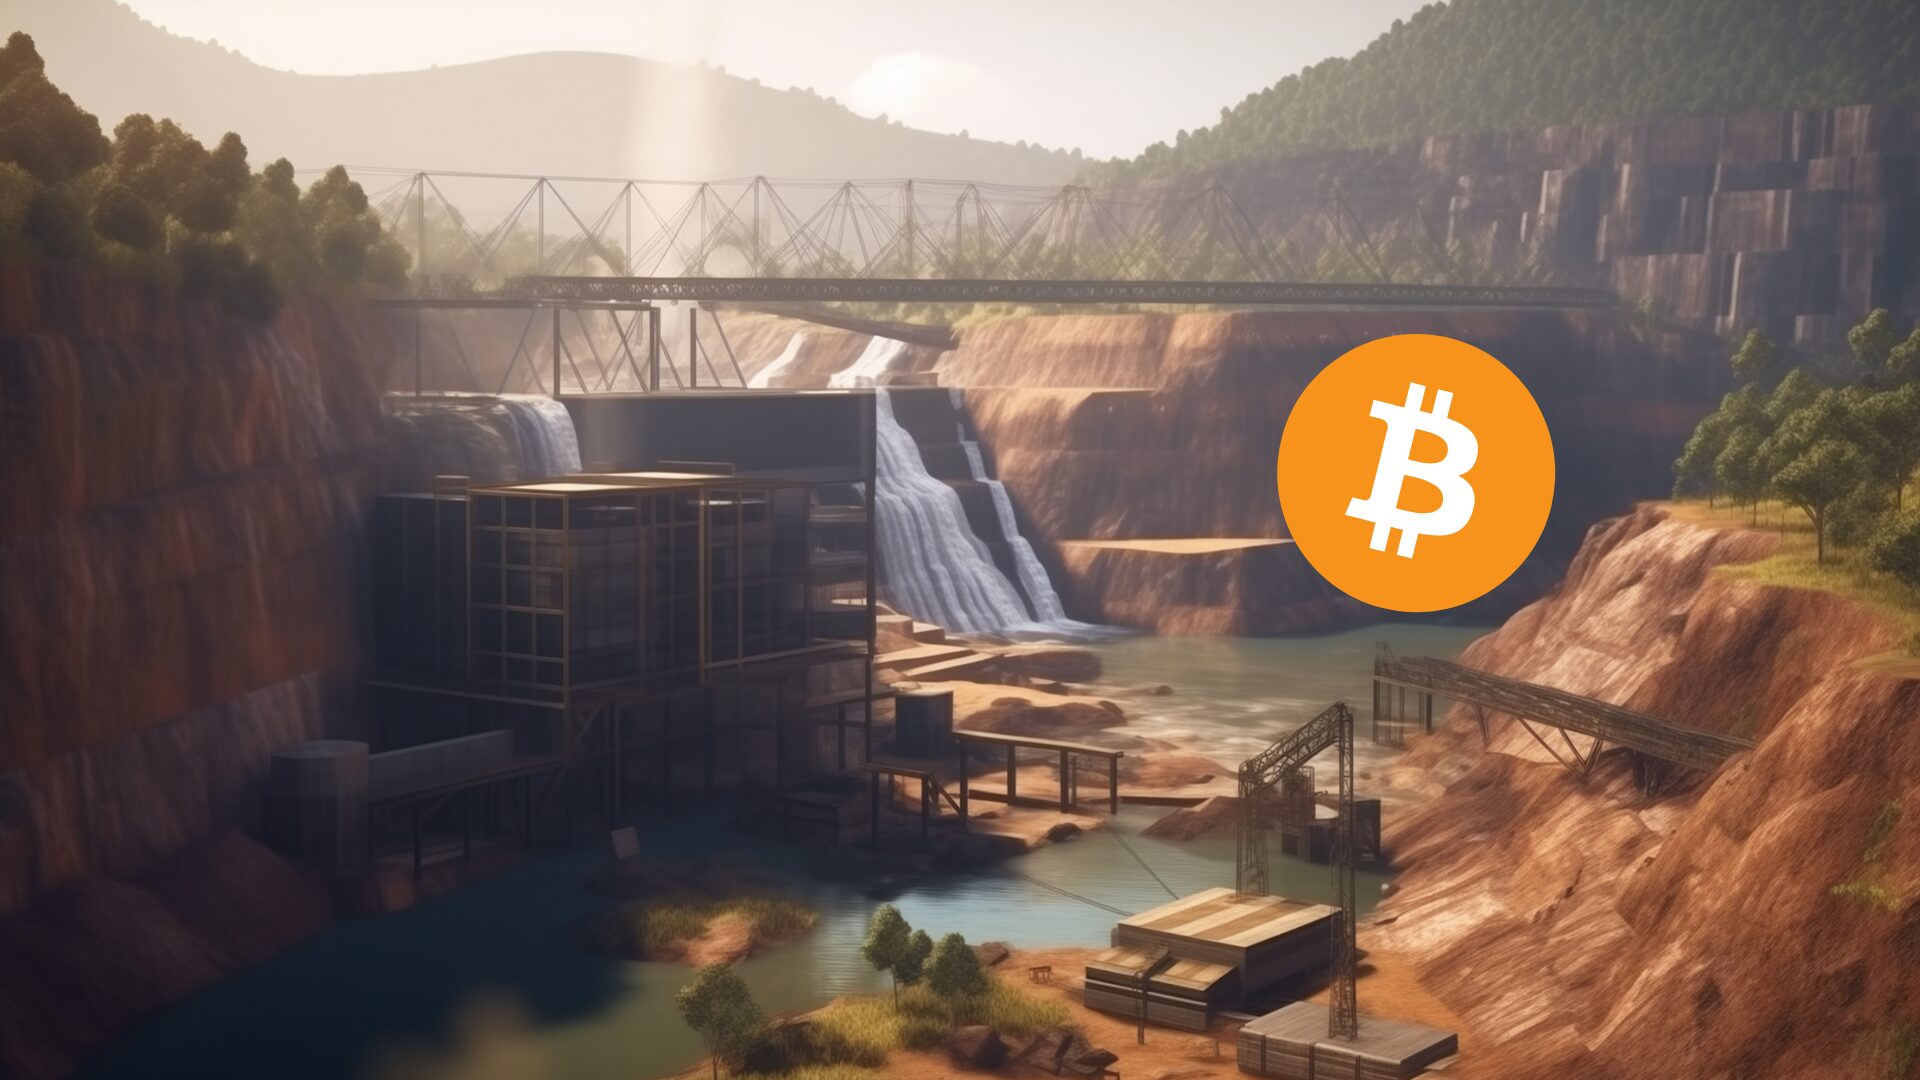 Ethiopia’s Hydropower Draws Chinese Bitcoin Miners